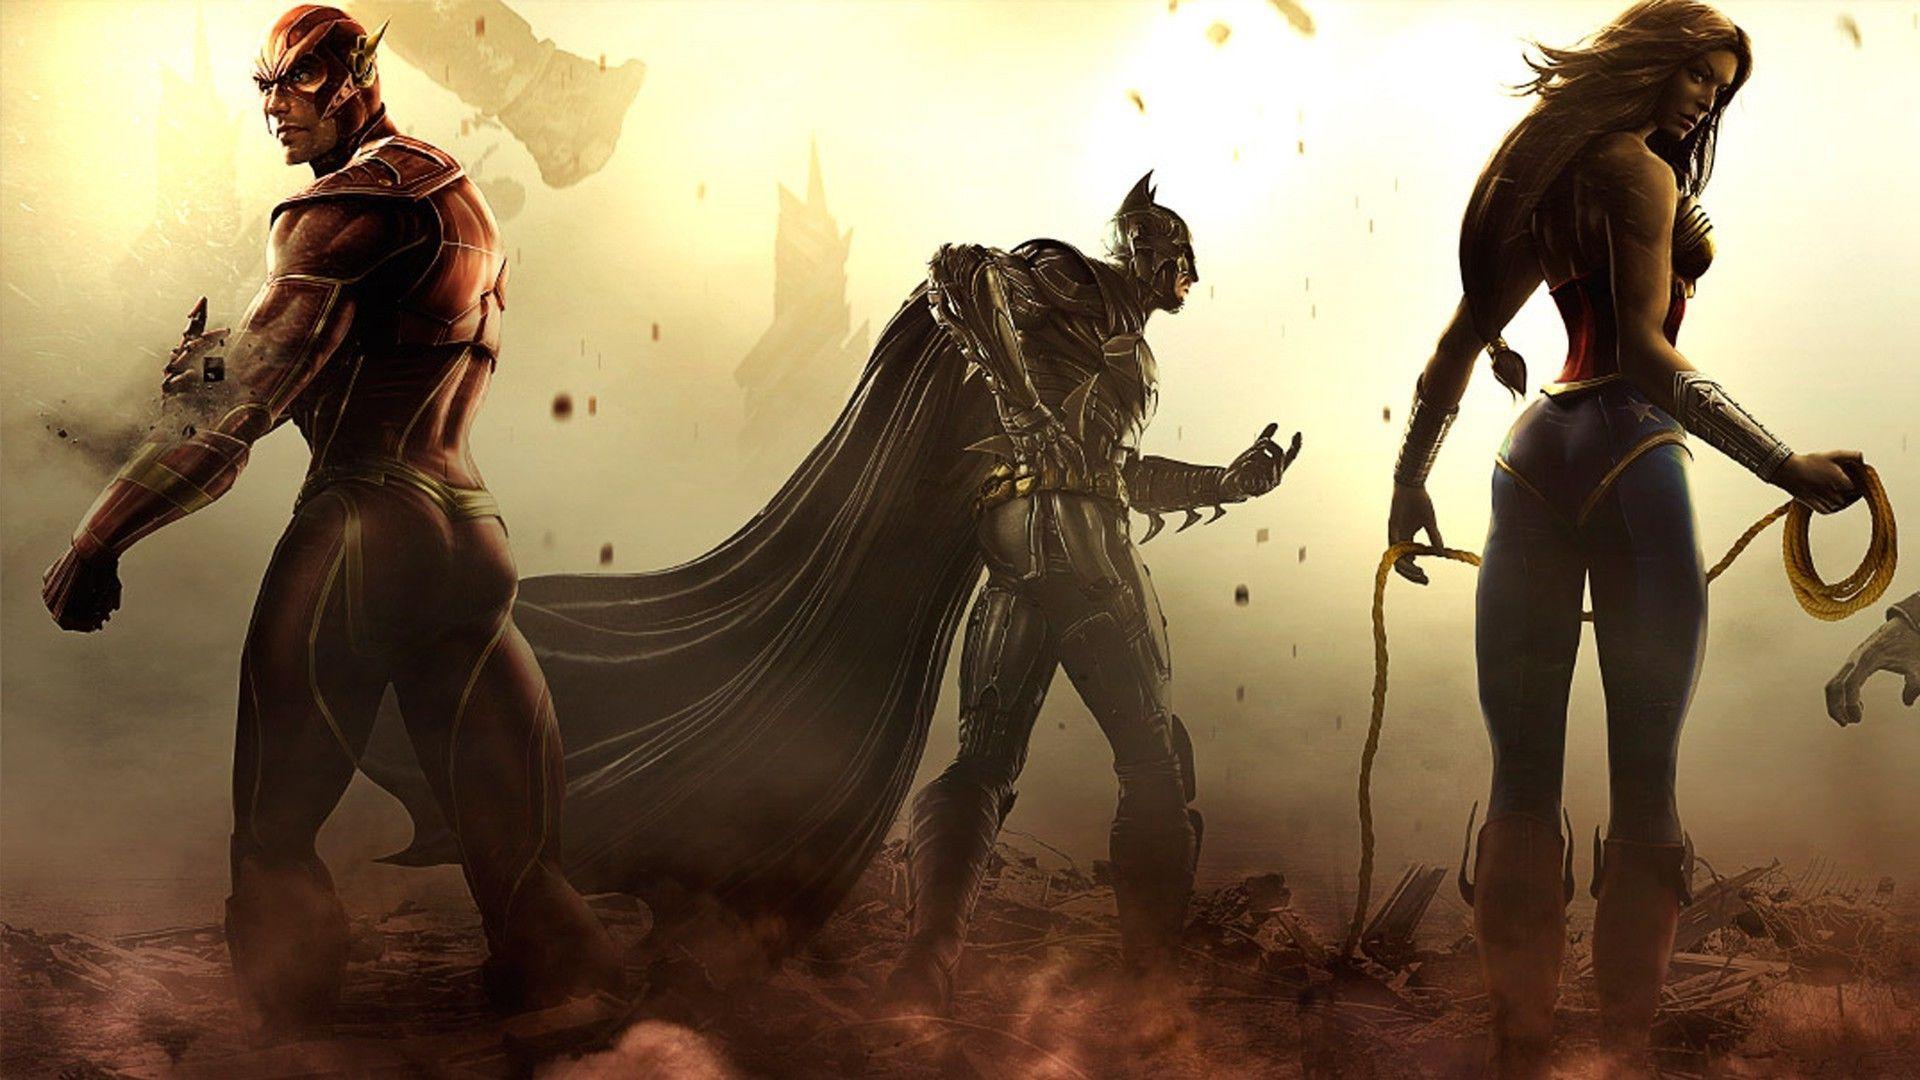 1920 x 1080 · jpeg - Injustice: Gods Among Us Wallpapers - Wallpaper Cave